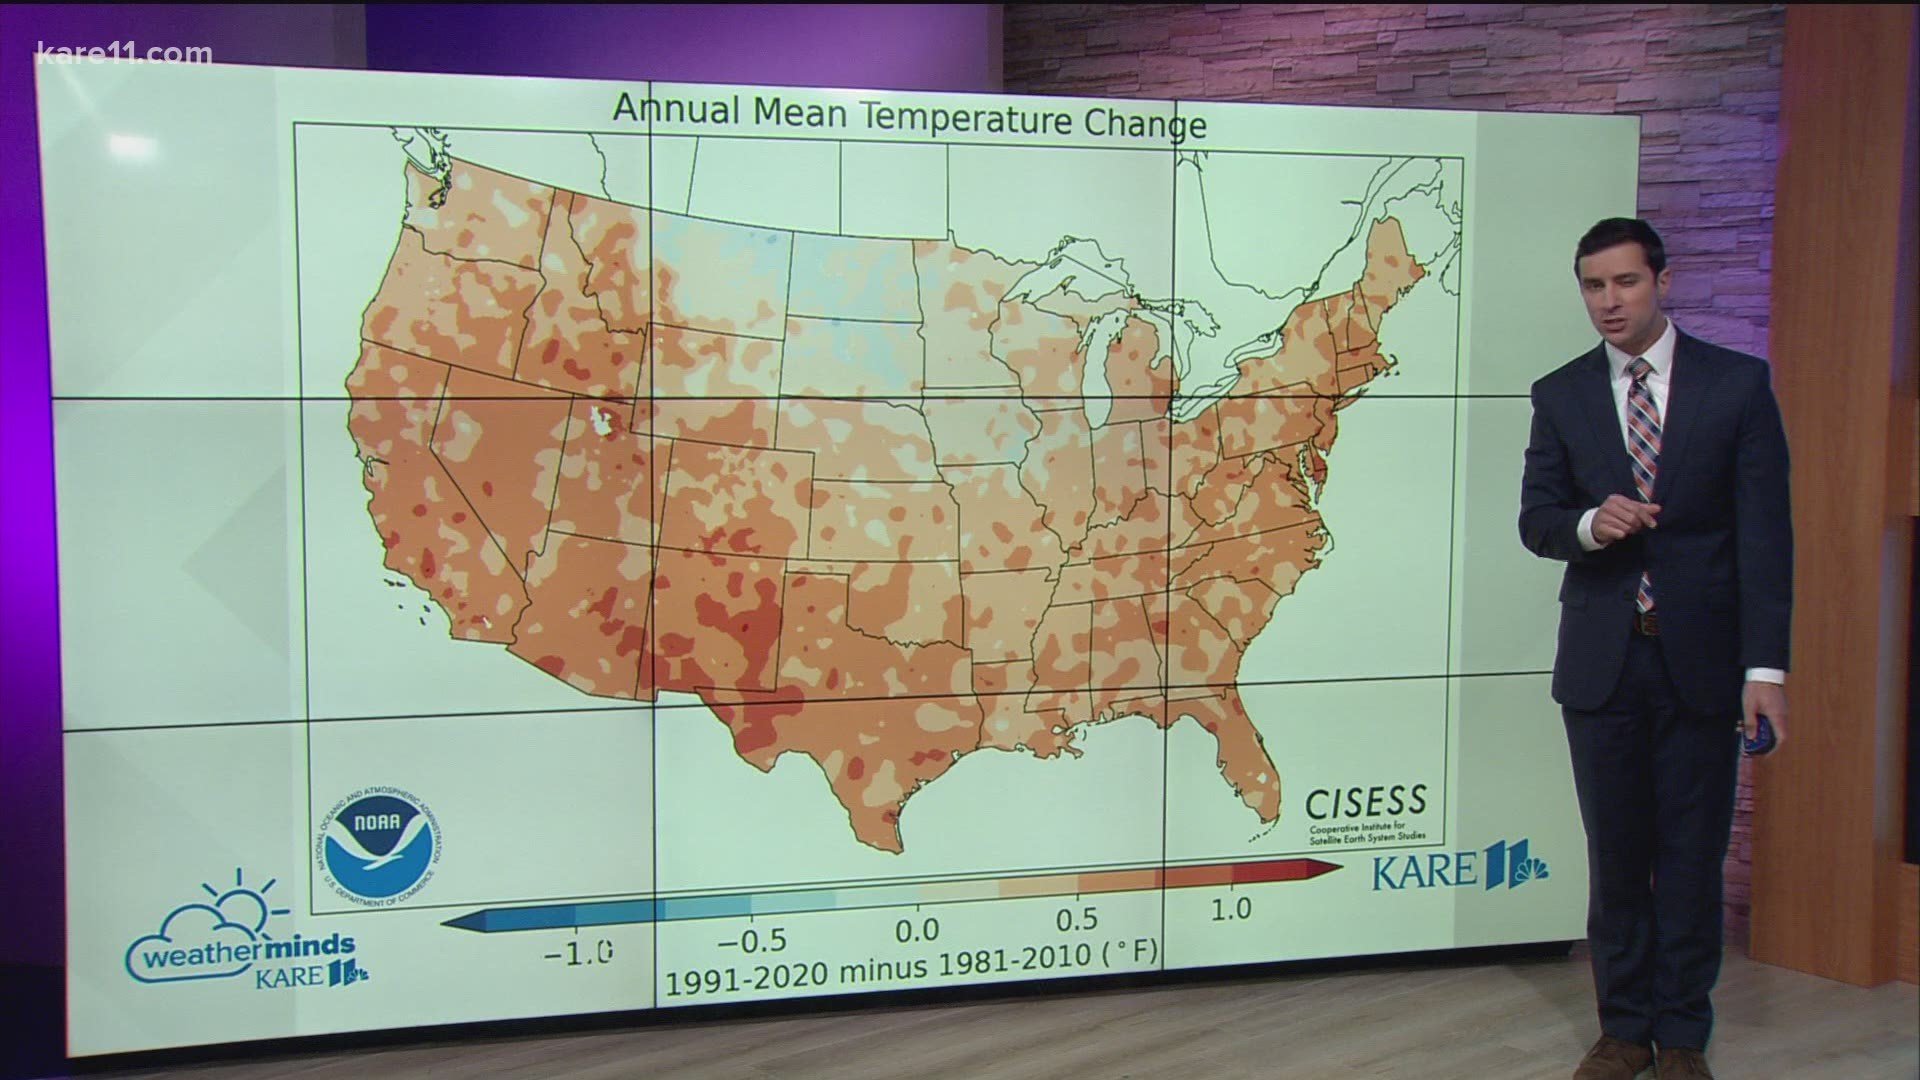 The National Weather Service released data for the new 30-year climate normal, which gives us a snapshot of what the recent climate is doing and how it's changing.